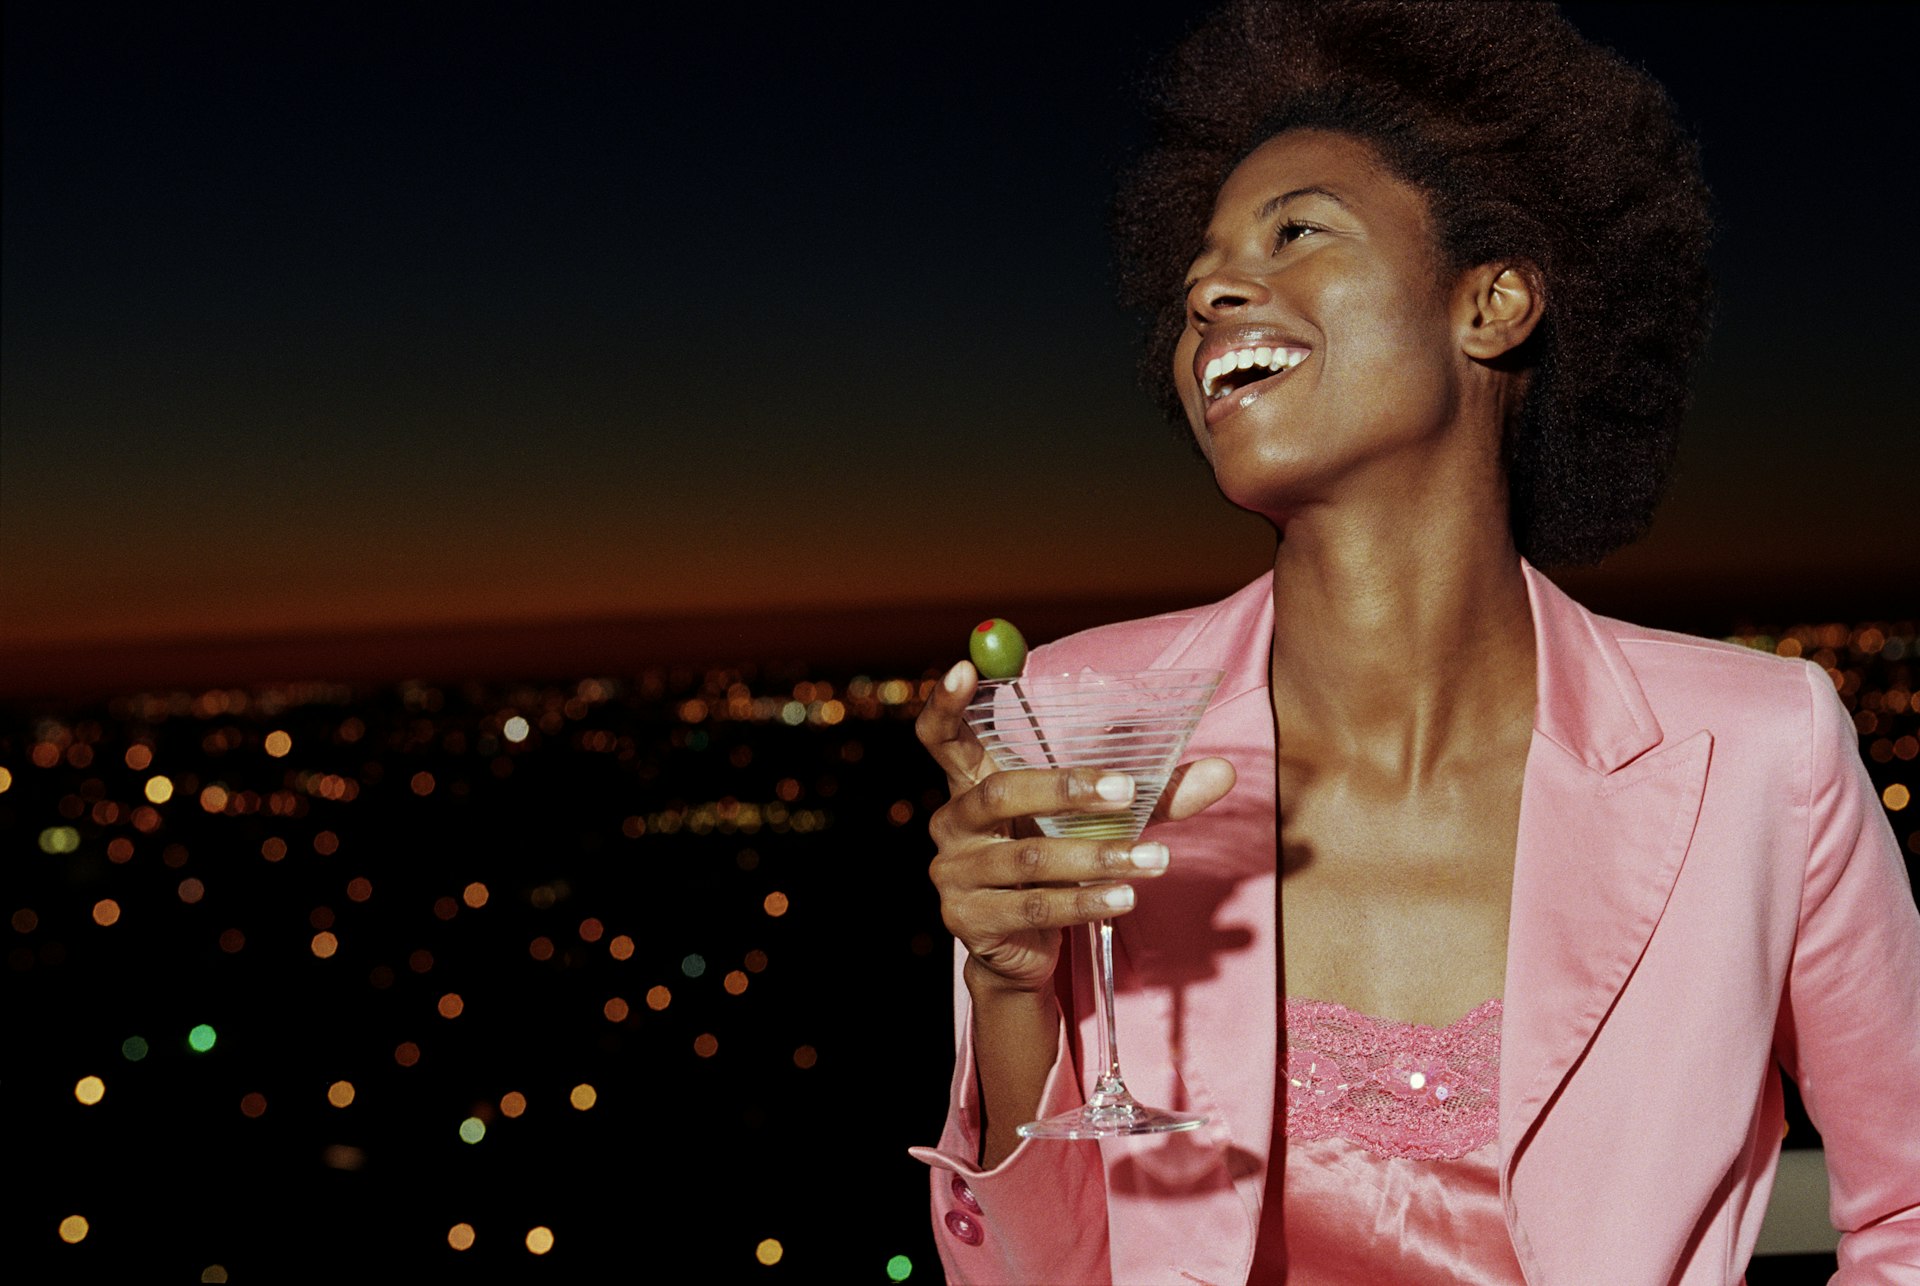 A woman wearing a pink jacket over a shiny pink top holds a martini glass while smiling on a balcony at night.